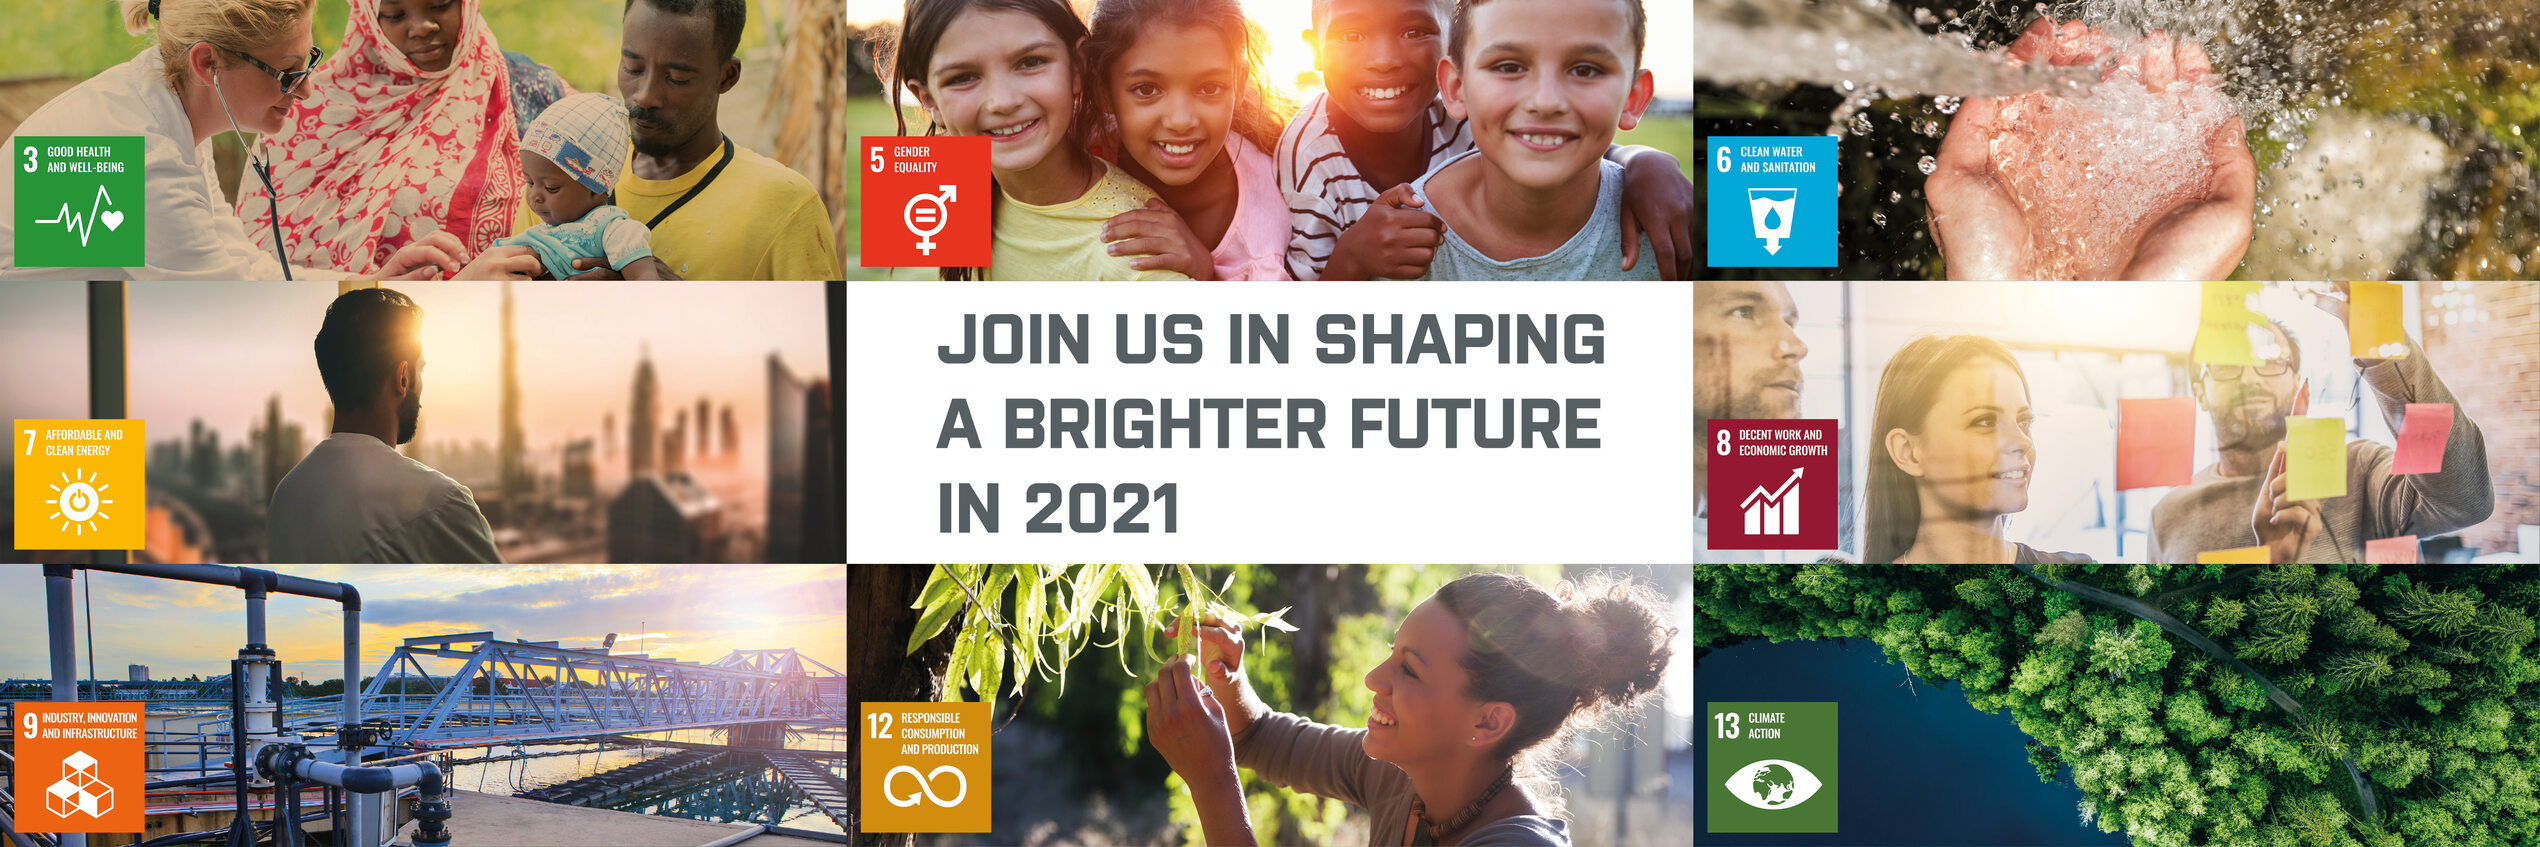 Join us in shaping a brighter future in 2021